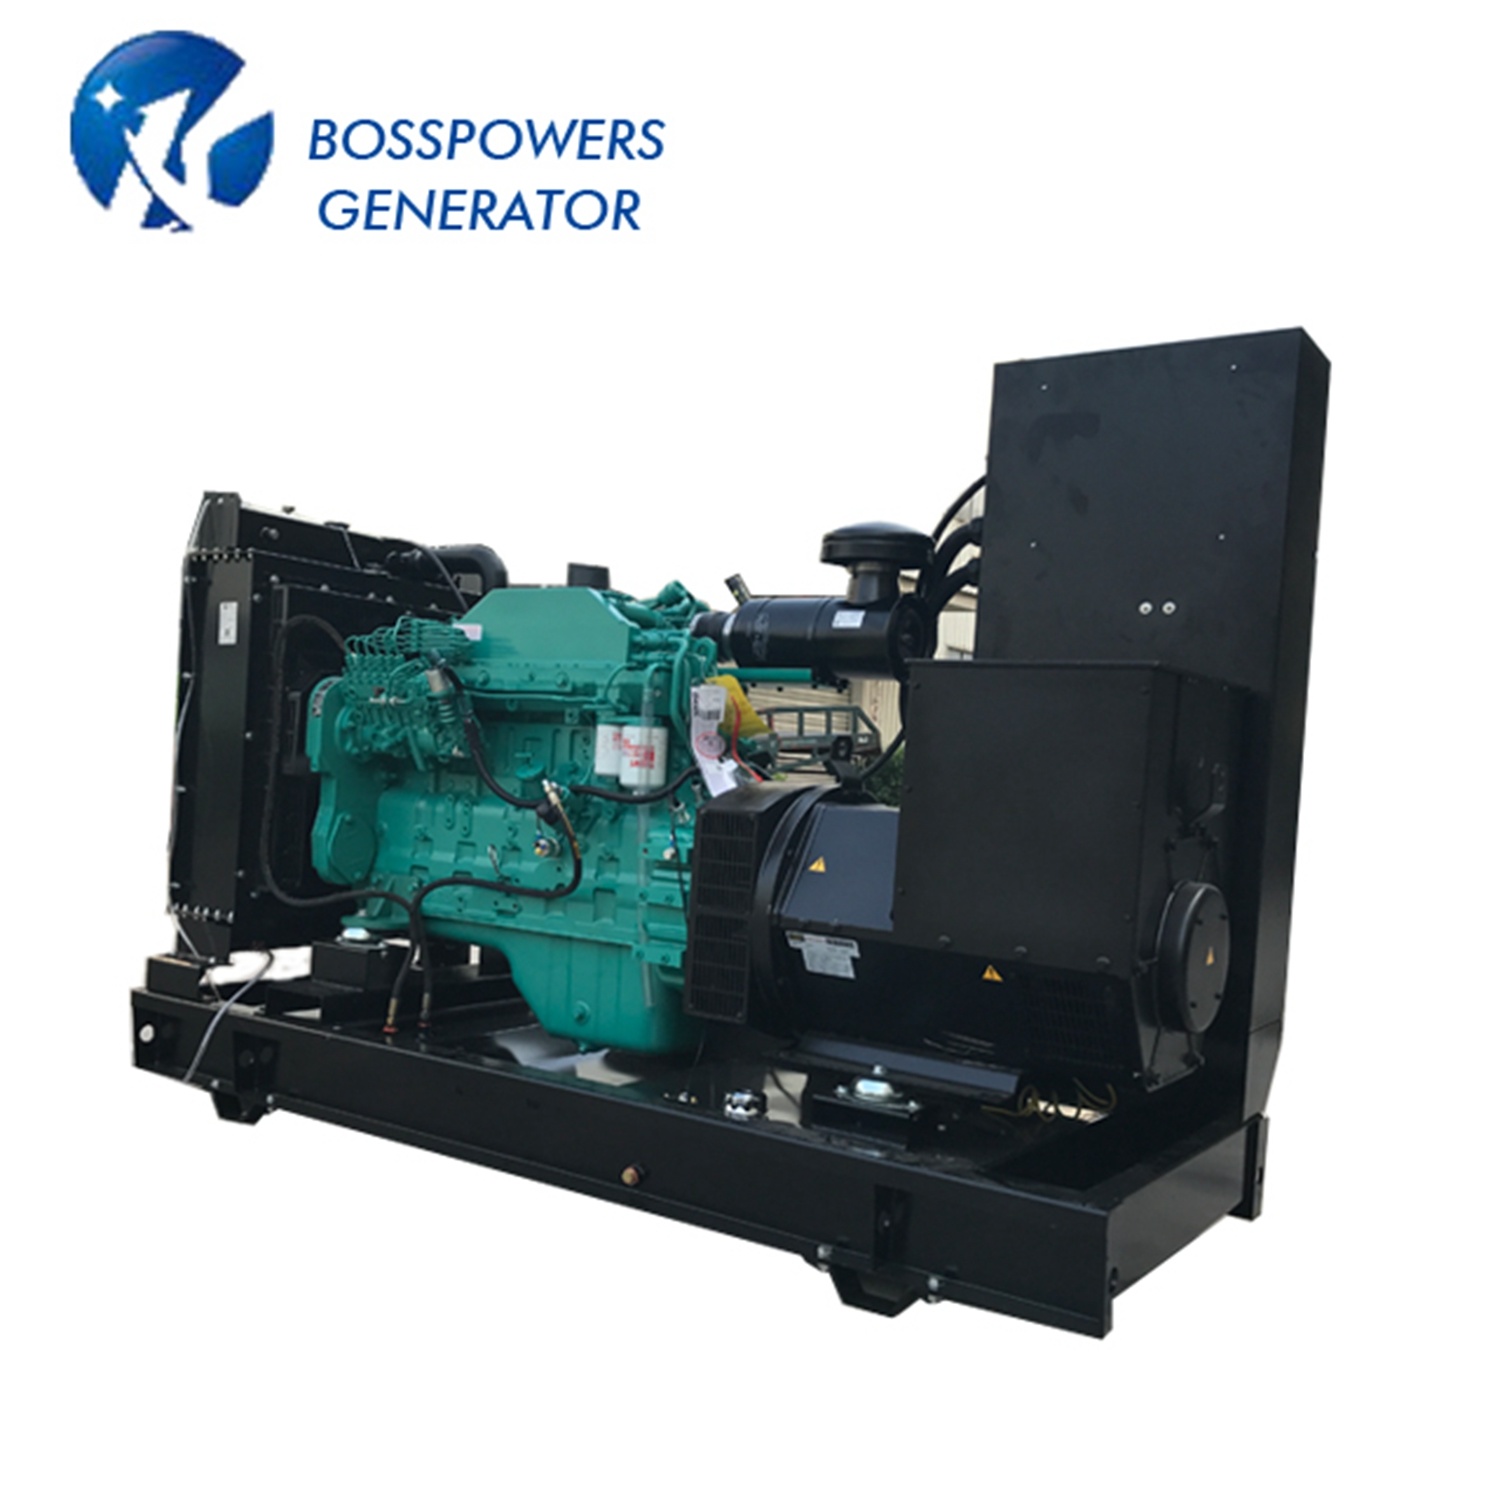 Chinese Famous Brand FAW Xichai 260kw Open or Silent Type Diesel Generator